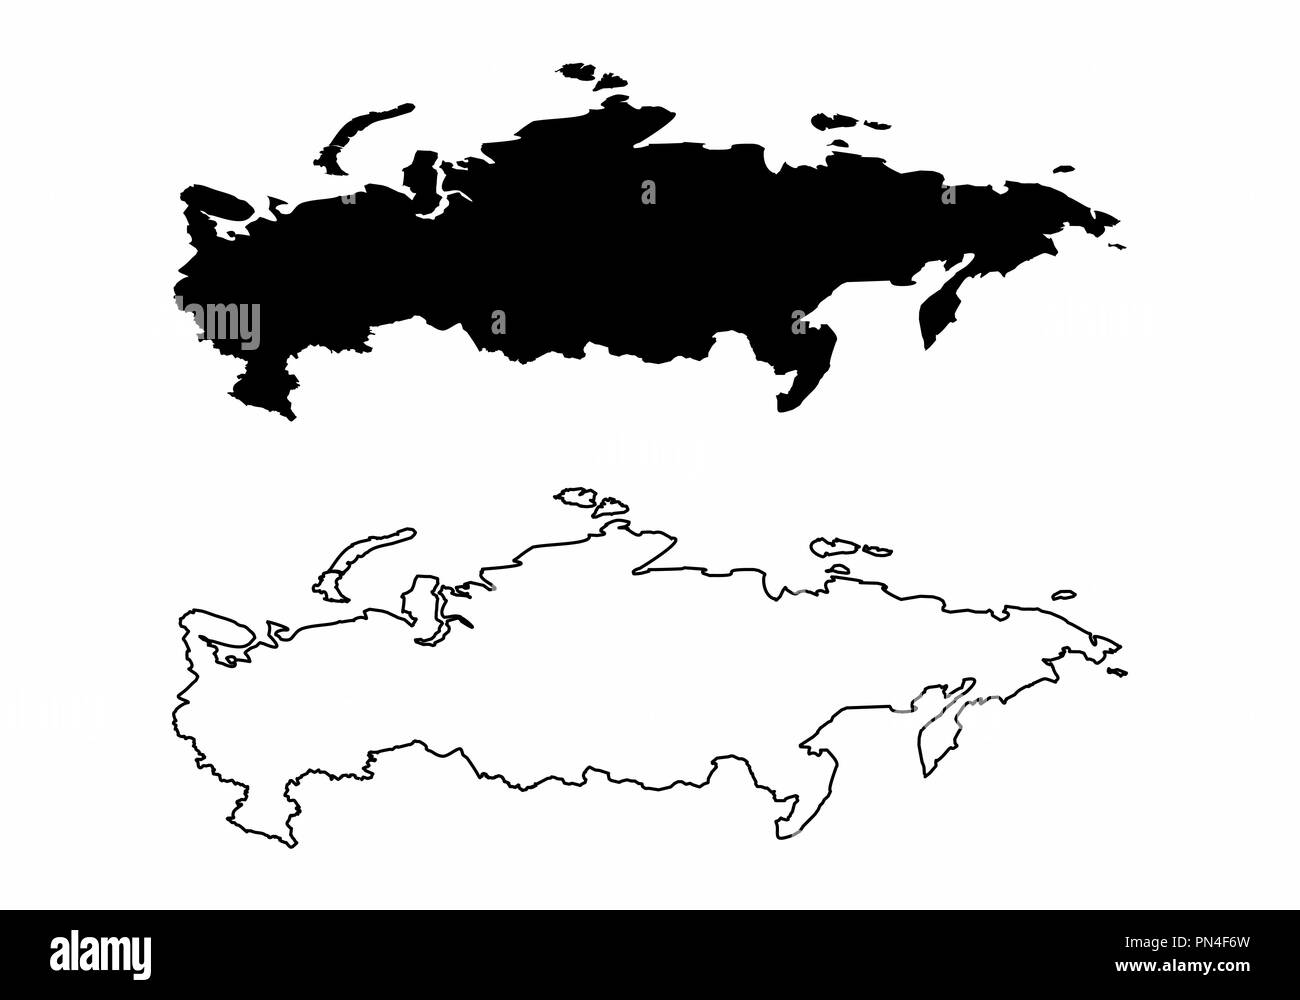 Simplified maps of Russia. Black and white outlines. Stock Vector